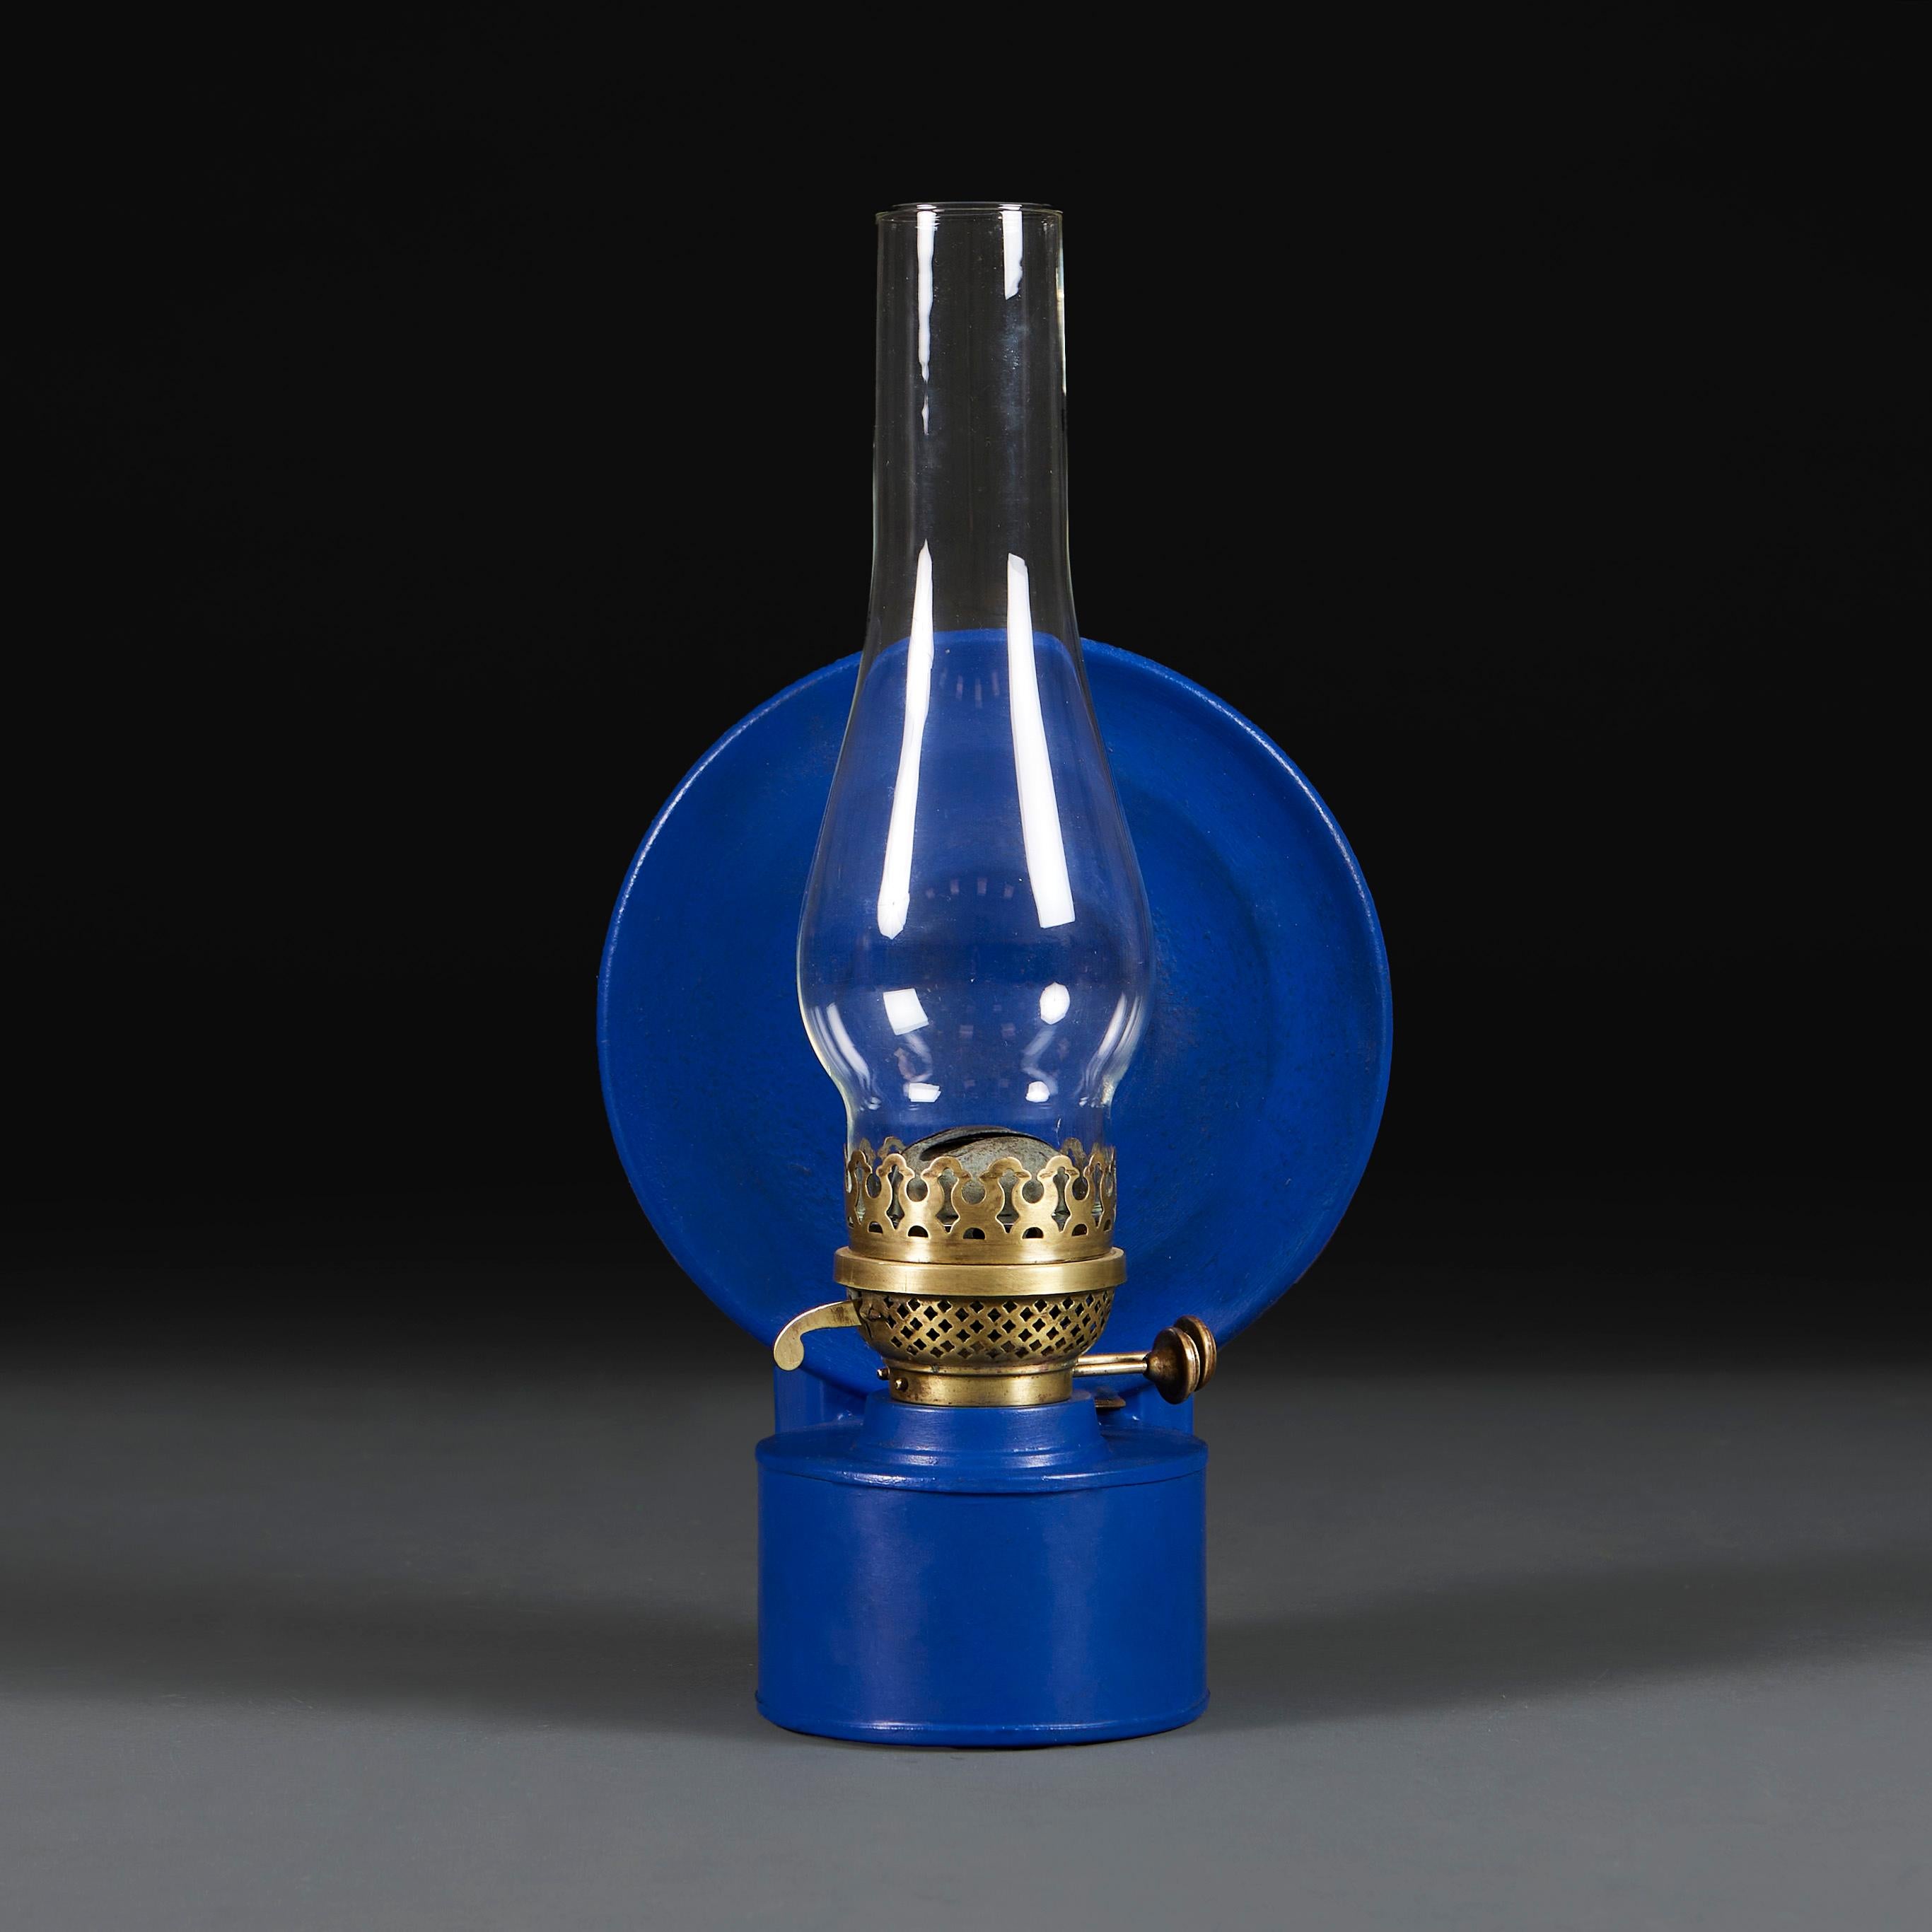 England, circa 1920

A wall mounted campaign storm lantern with a blue toleware circular backplate, pierced brass duplex burner and glass hurricane shade. 

Height 39.00cm

Width 21.00cm

Depth 15.00cm